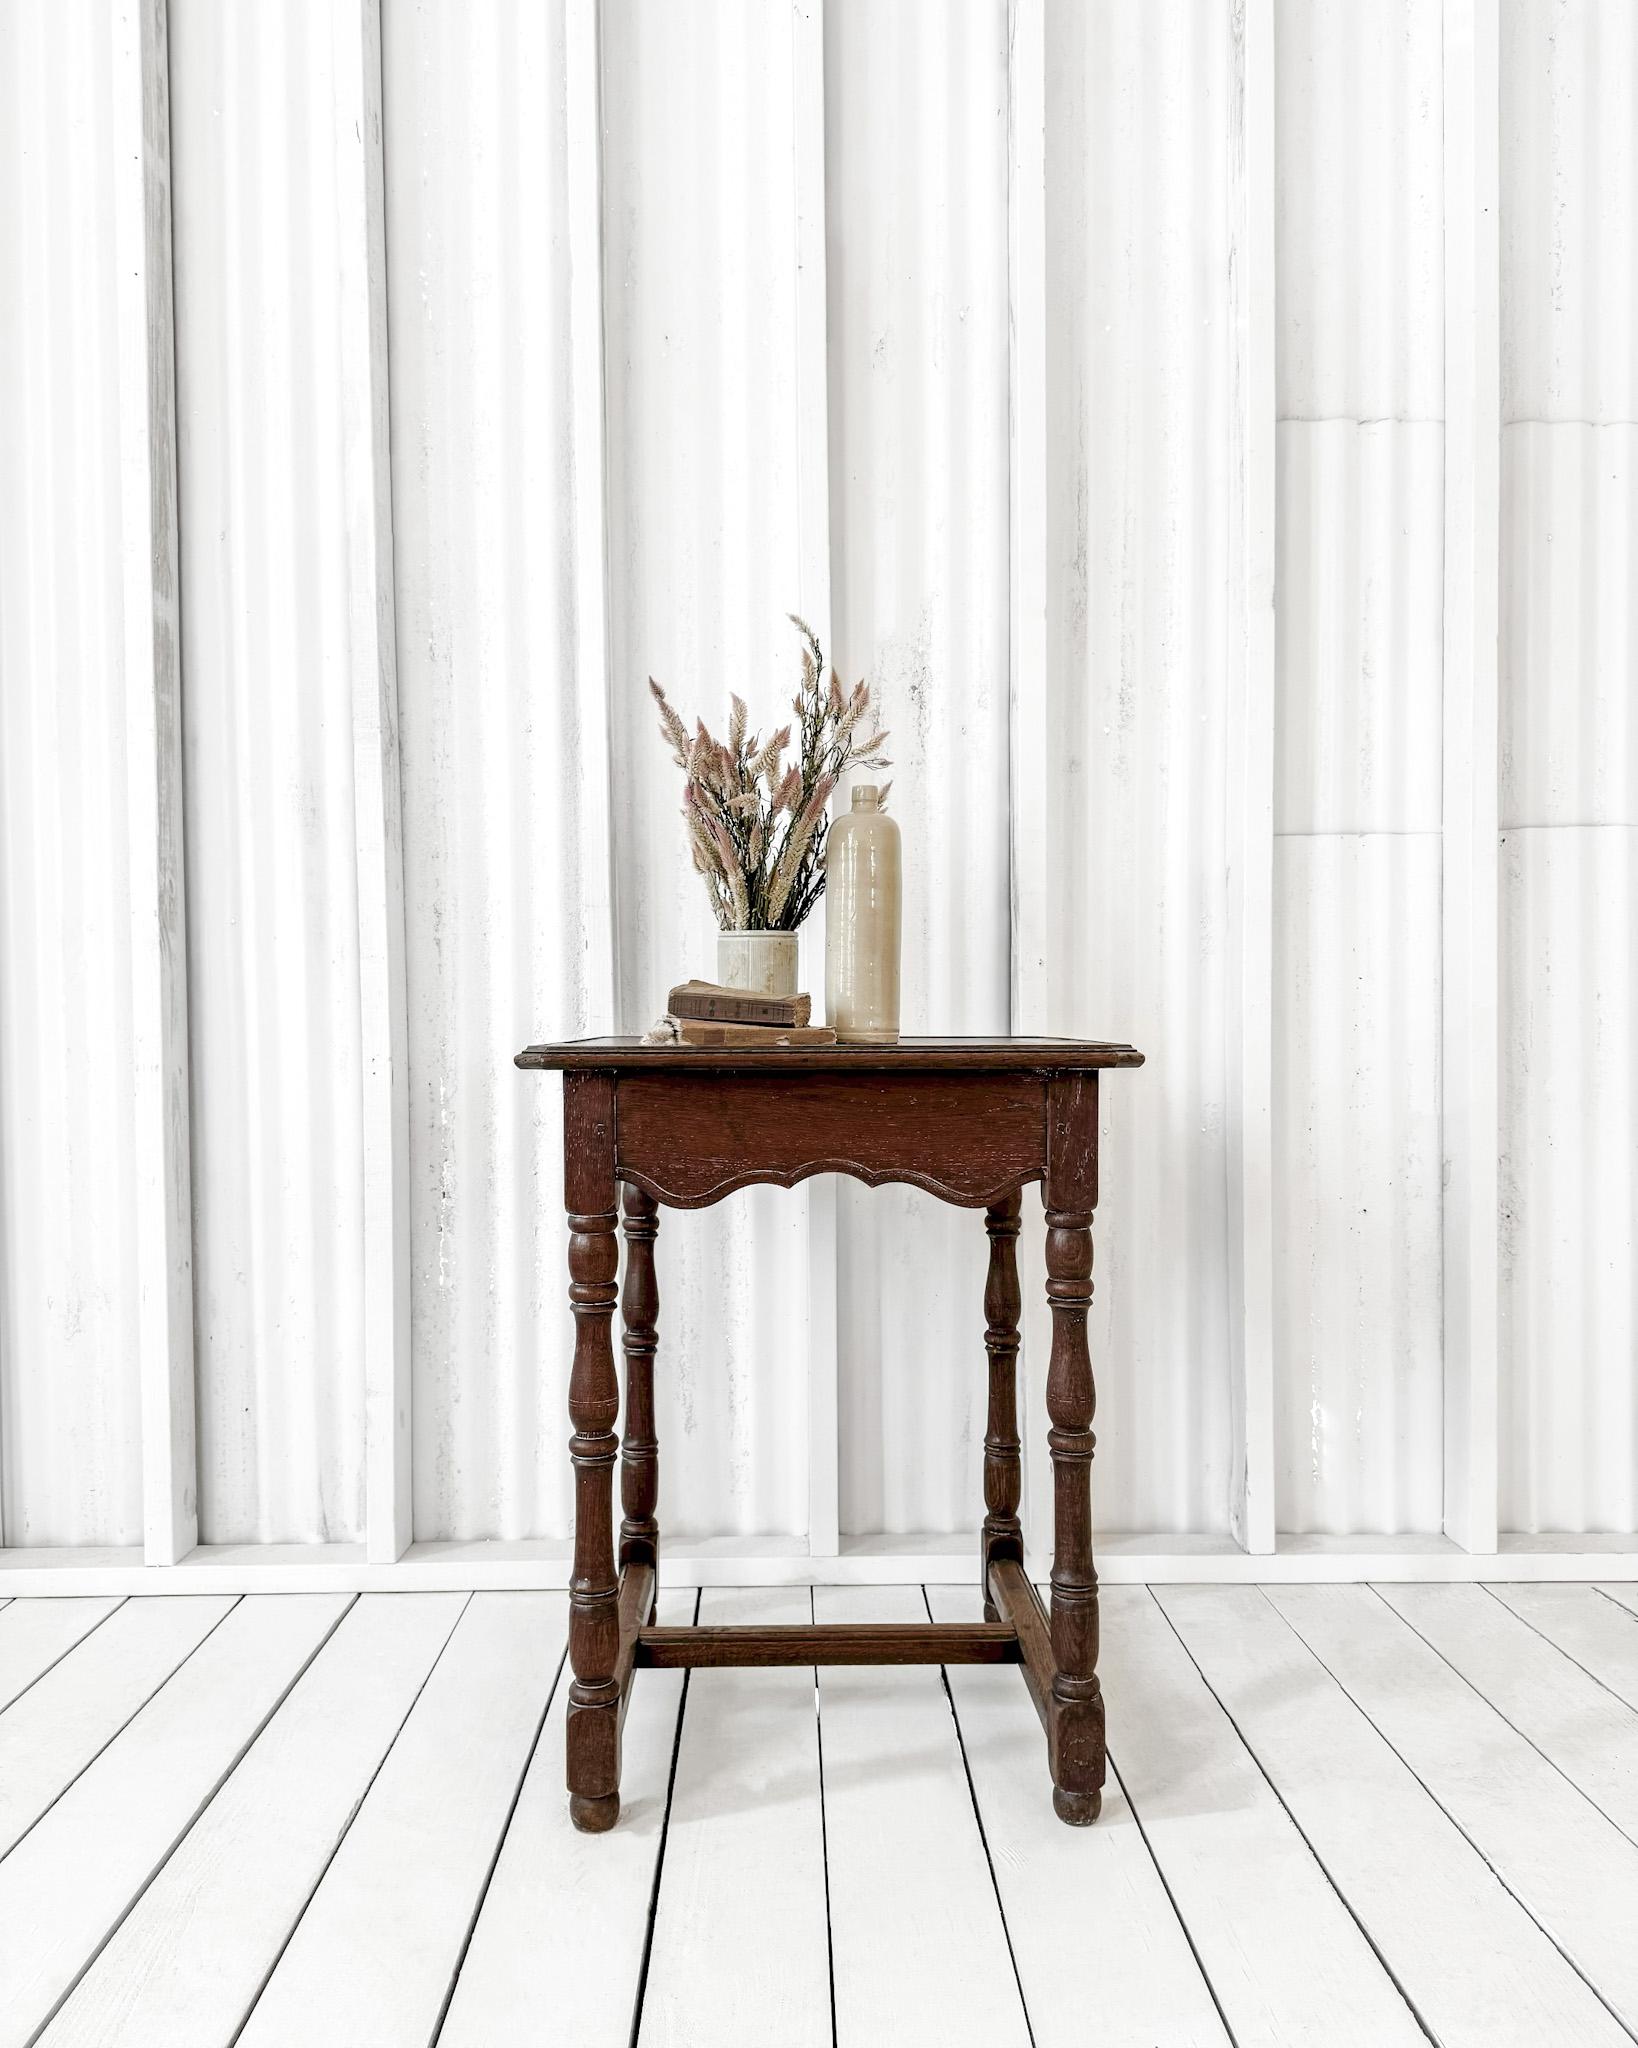 Charming side table having a scalloped apron and turned legs. The top features an inlaid design, finished in a molded beveled edge and softly clipped corners. Molded edge supports join the legs, which rest upon bun feet. A versatile and stylish